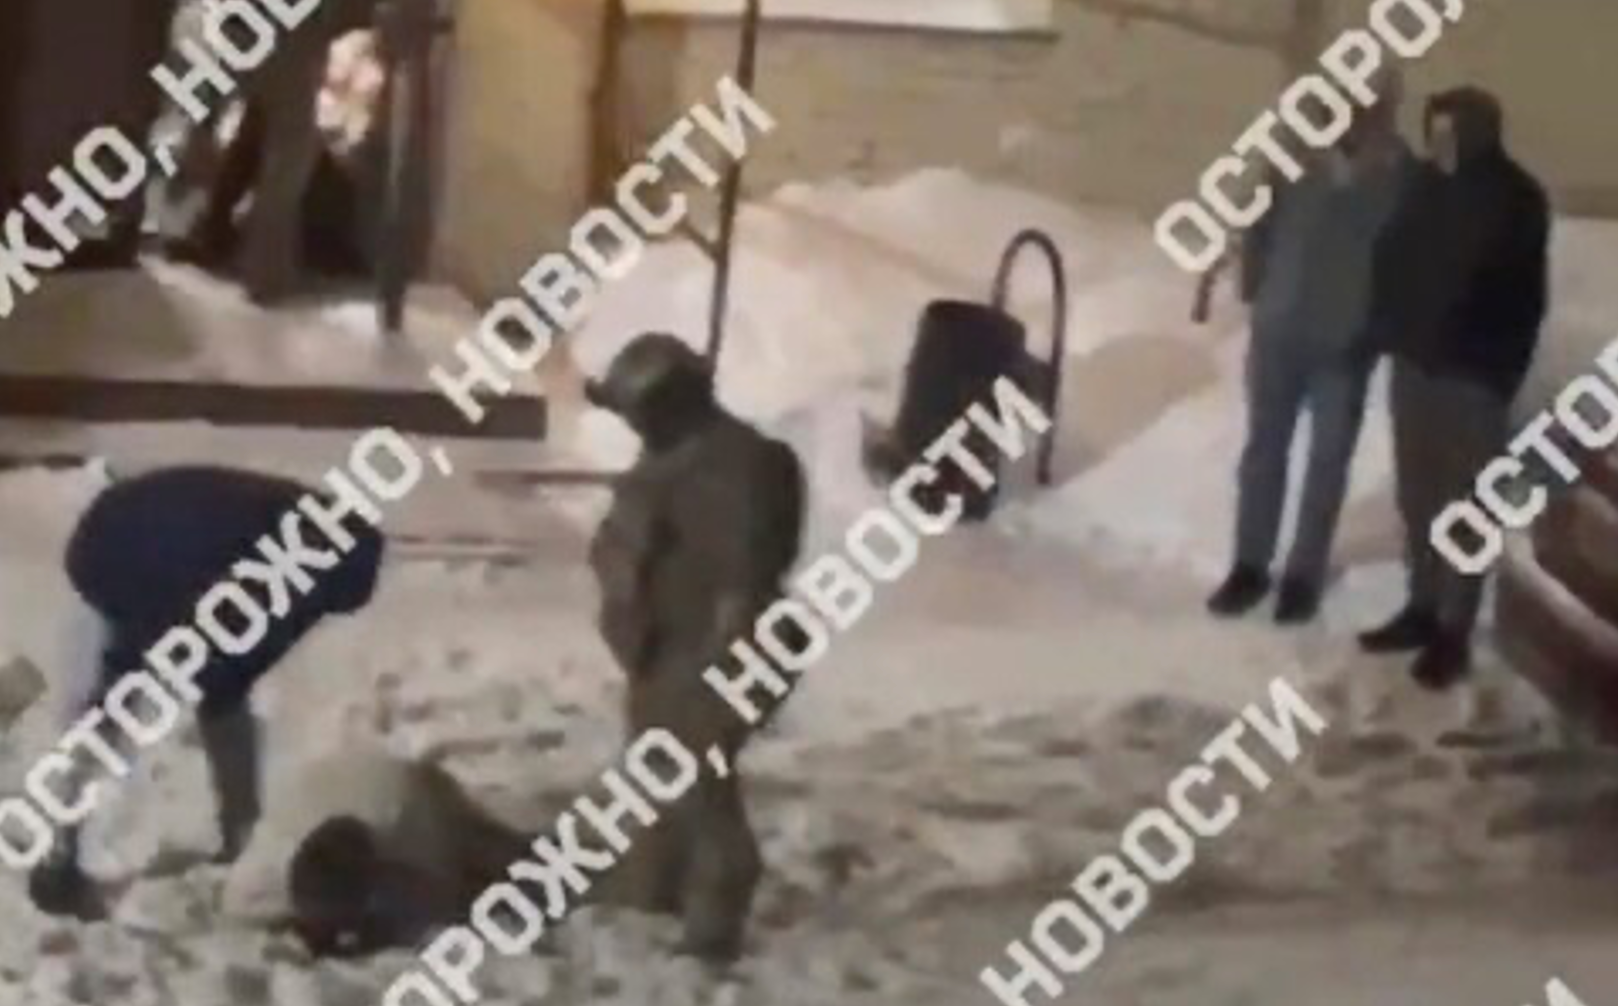 A plainclothes officer kicks and punches someone on the ground in video released on Russian media